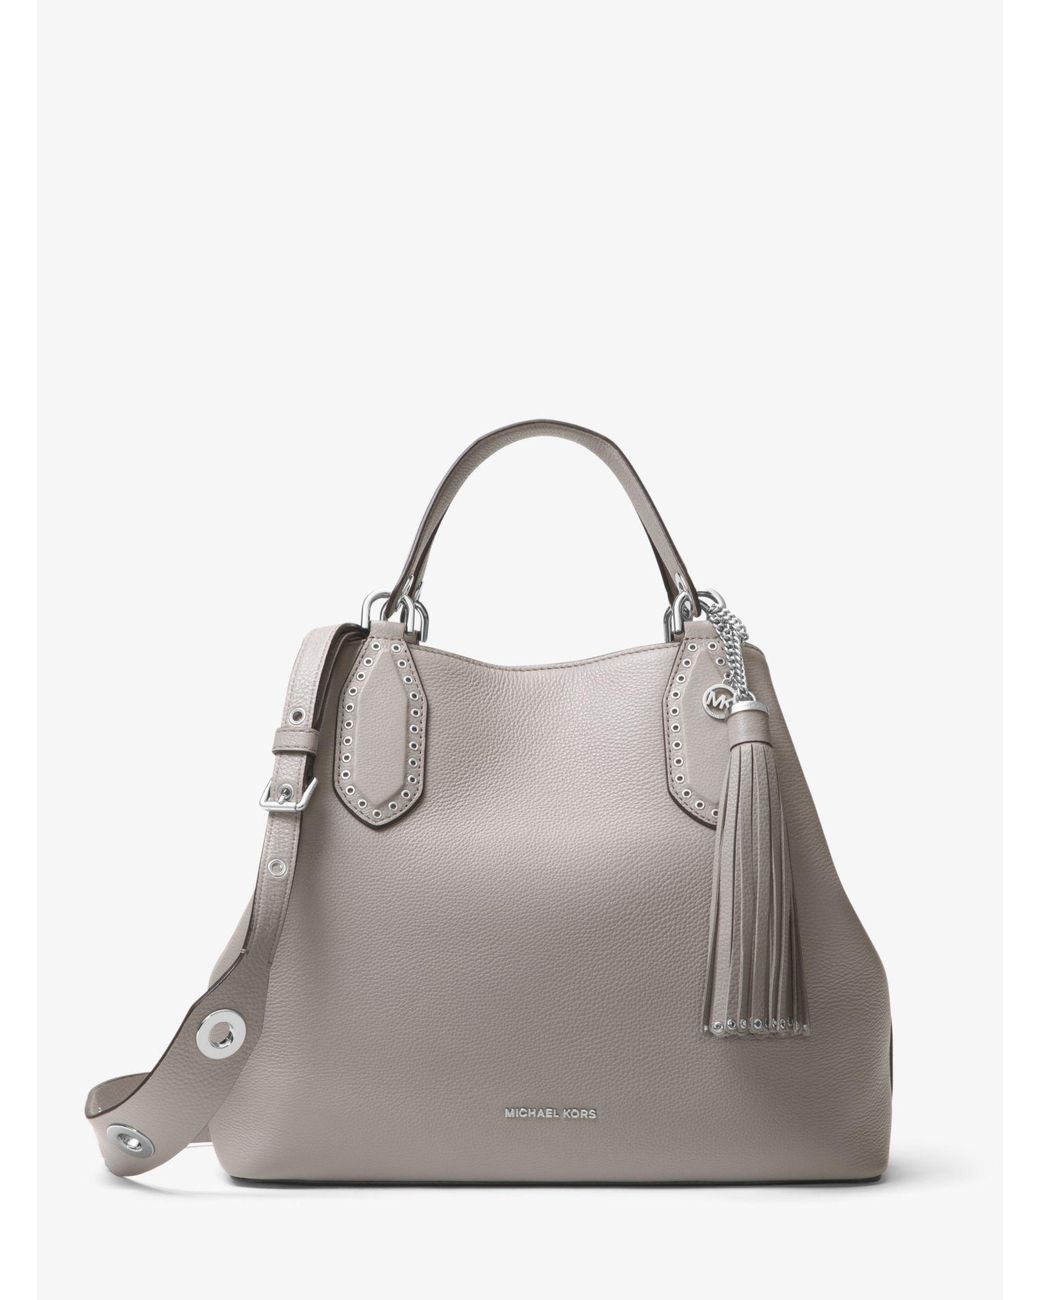 Michael Kors Brooklyn Large Leather Satchel in Gray | Lyst